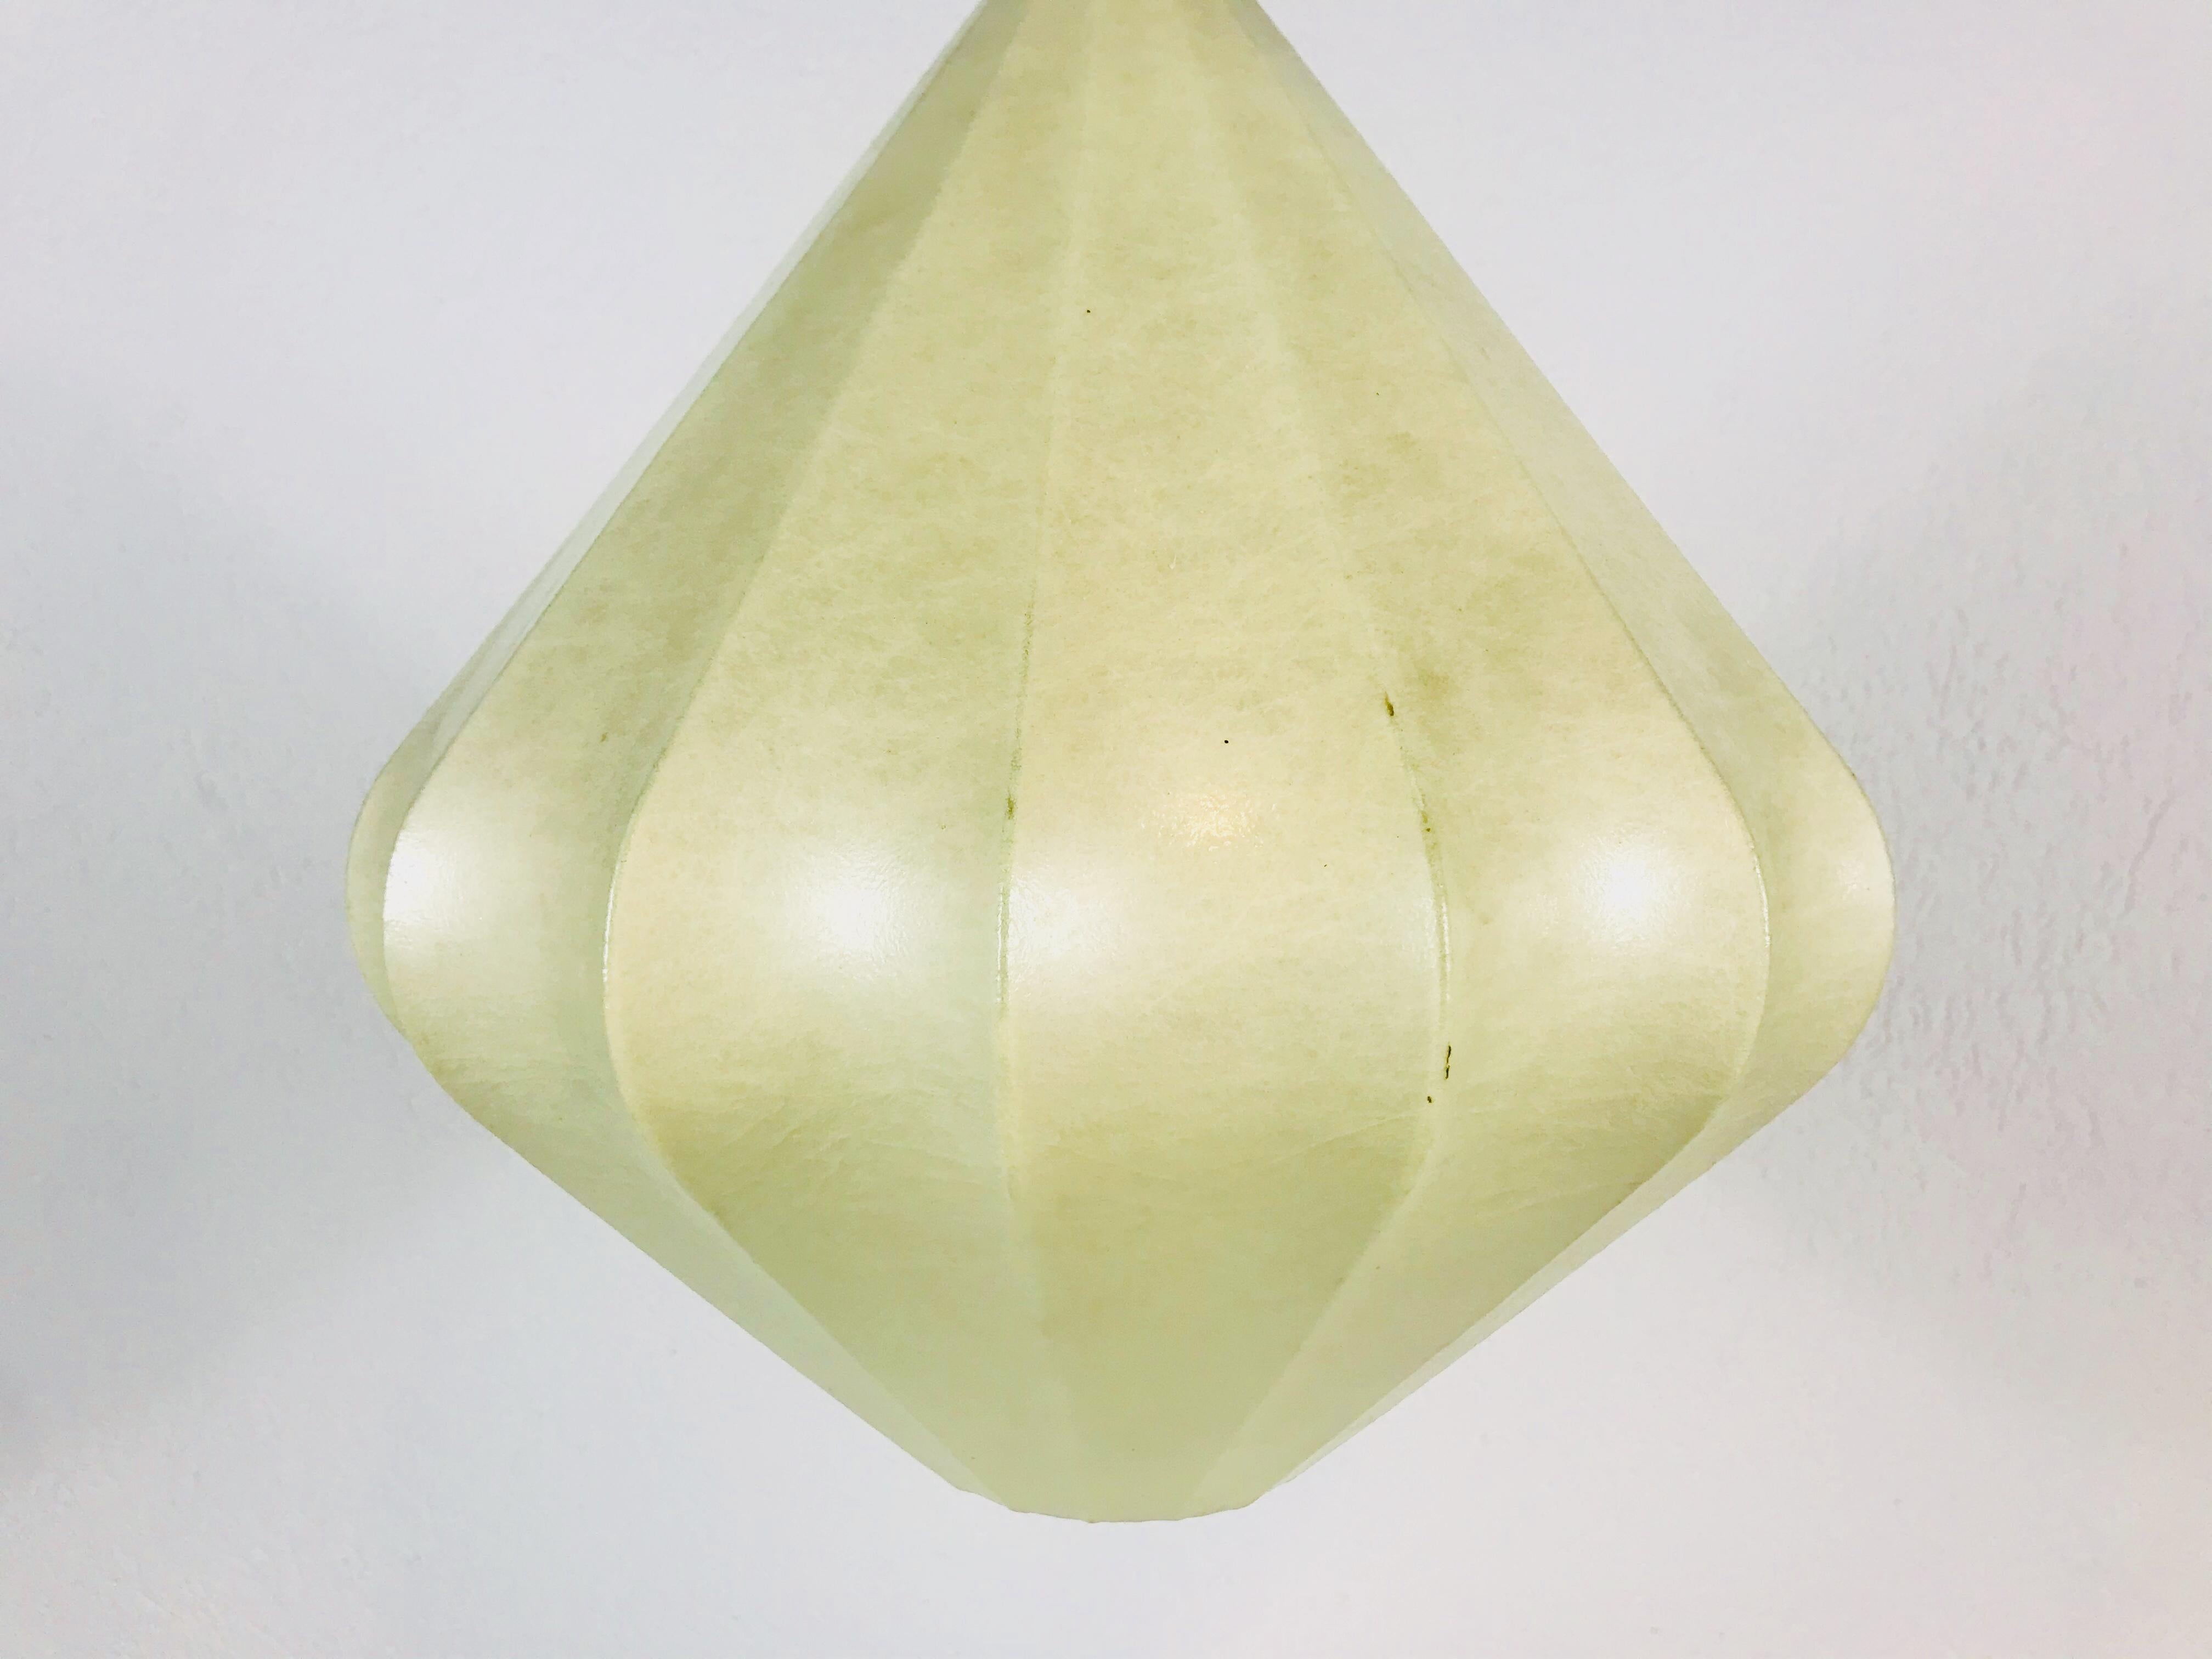 European Mid-Century Cocoon Pendant Light by Achille Castiglioni for Flos, 1960s, Italy